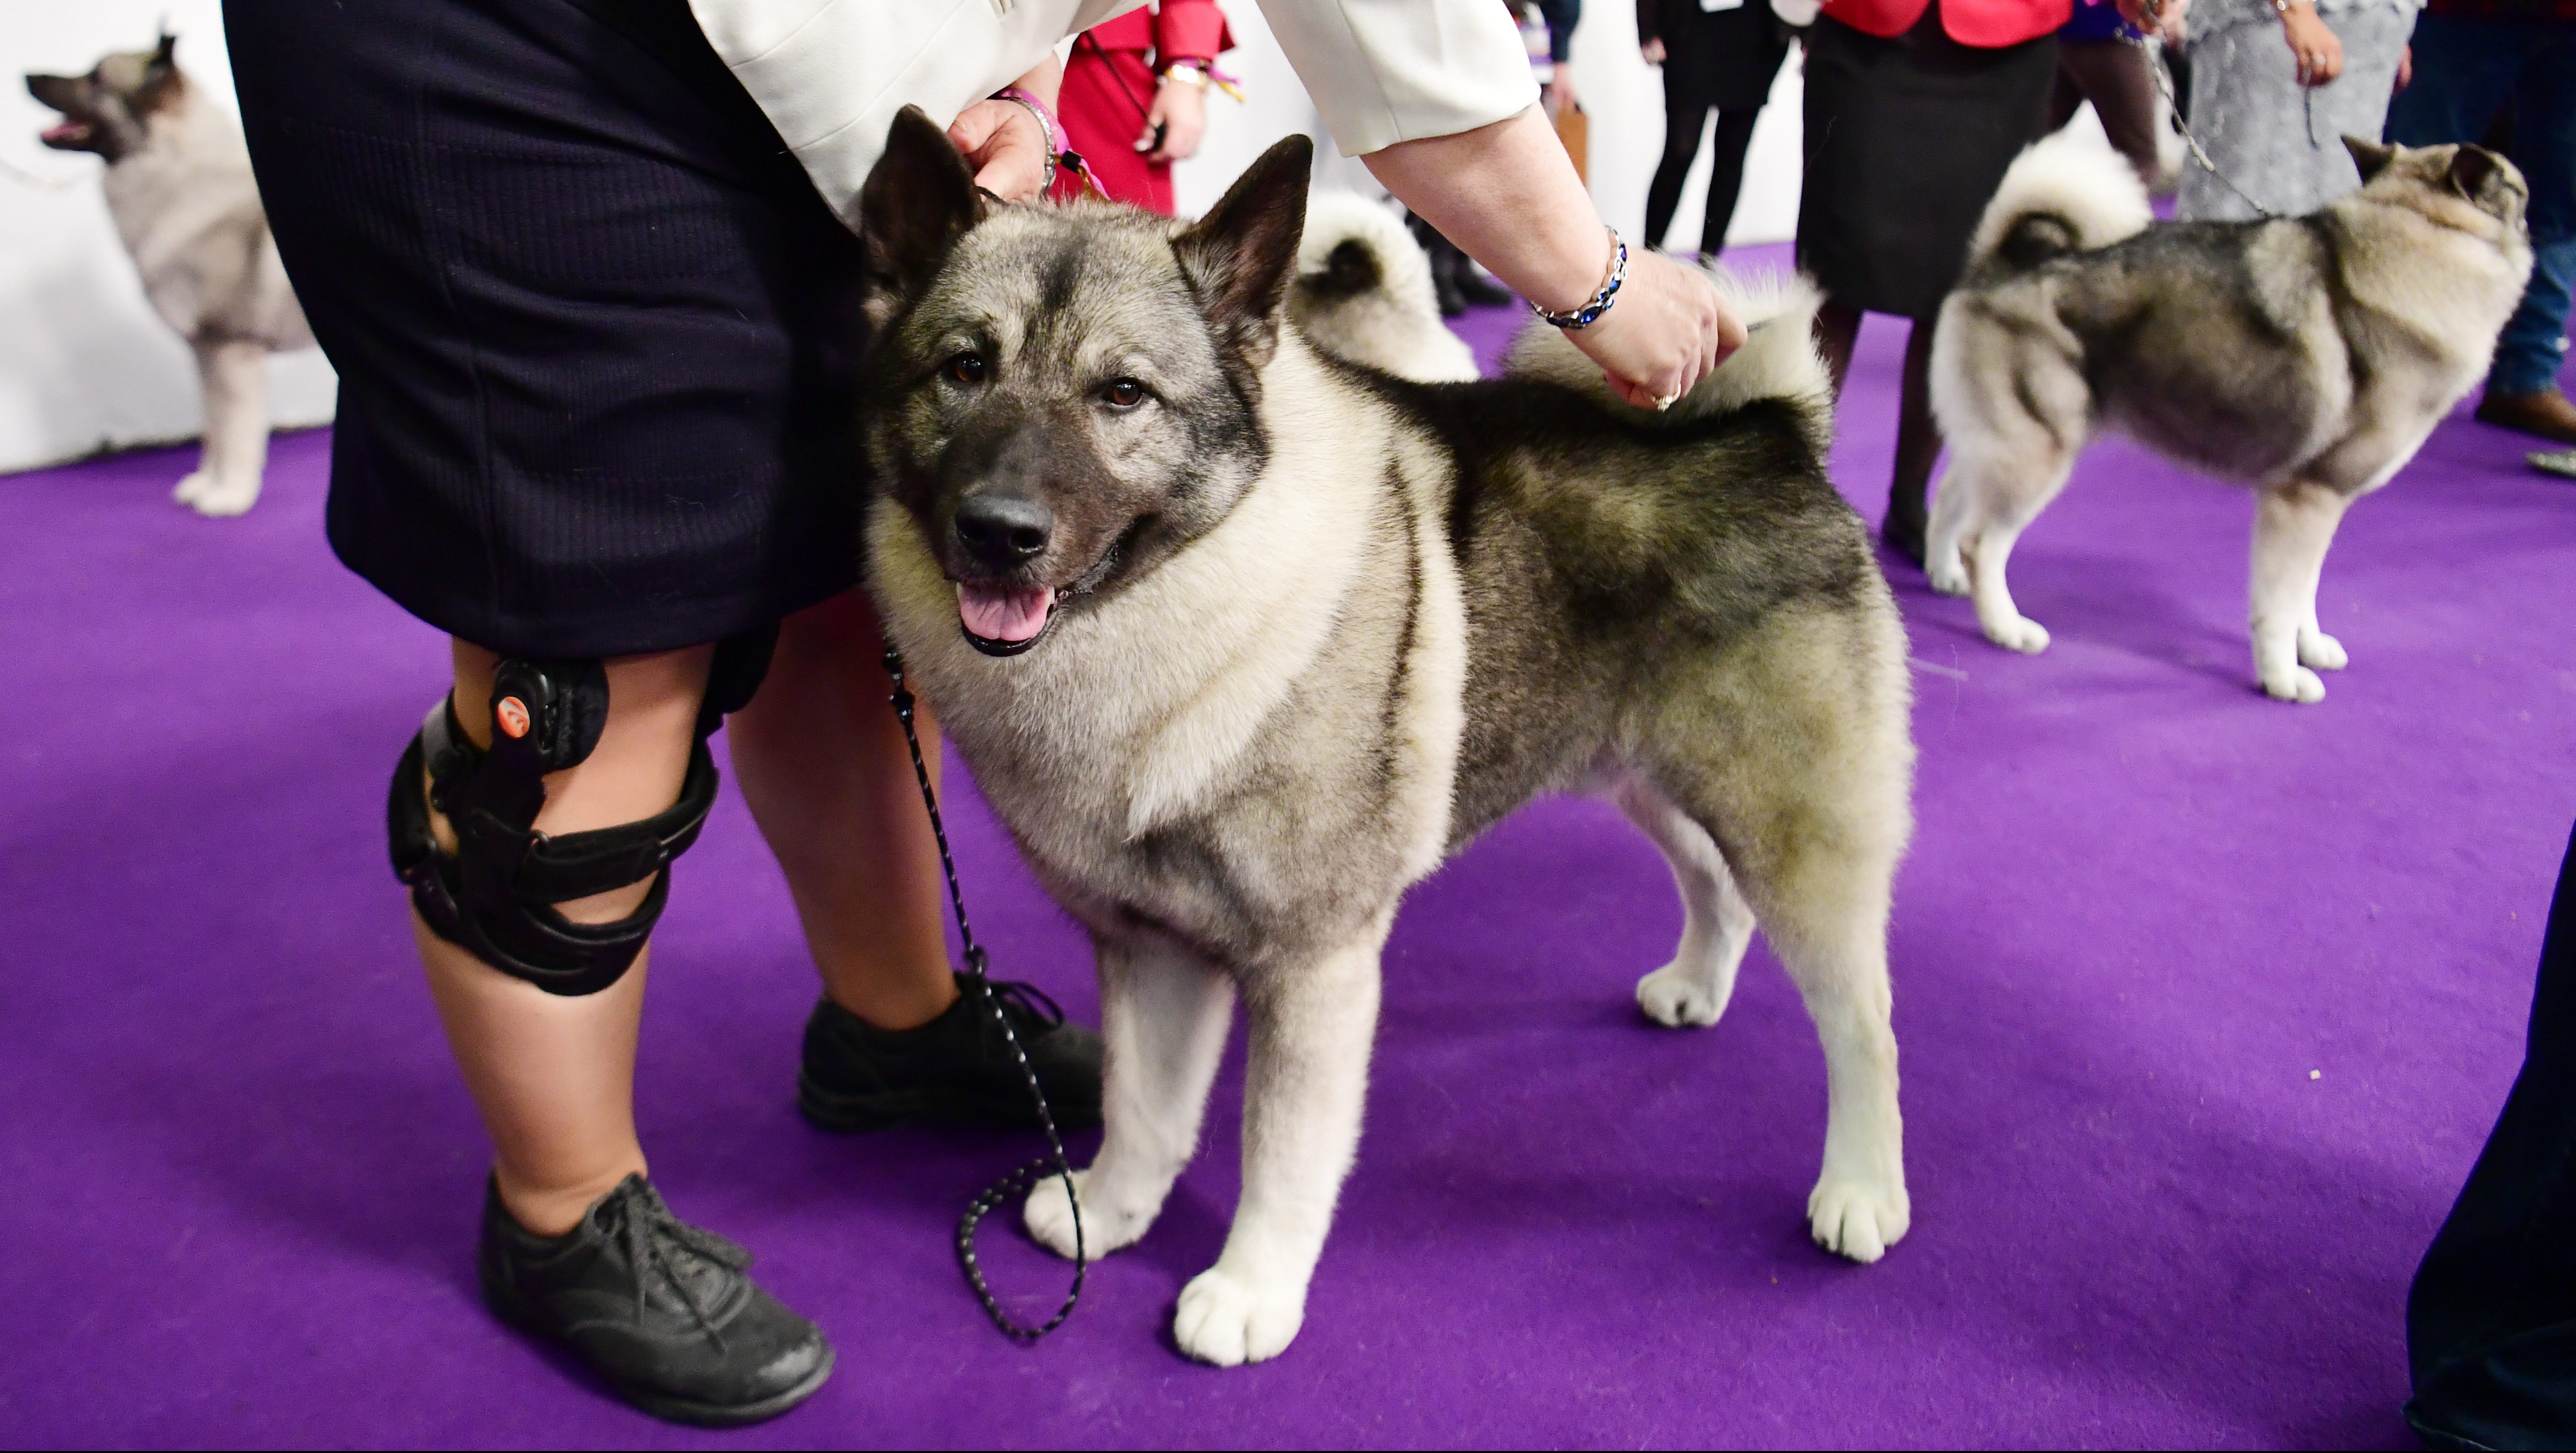 How to Watch Westminster Dog Show 2019 Online